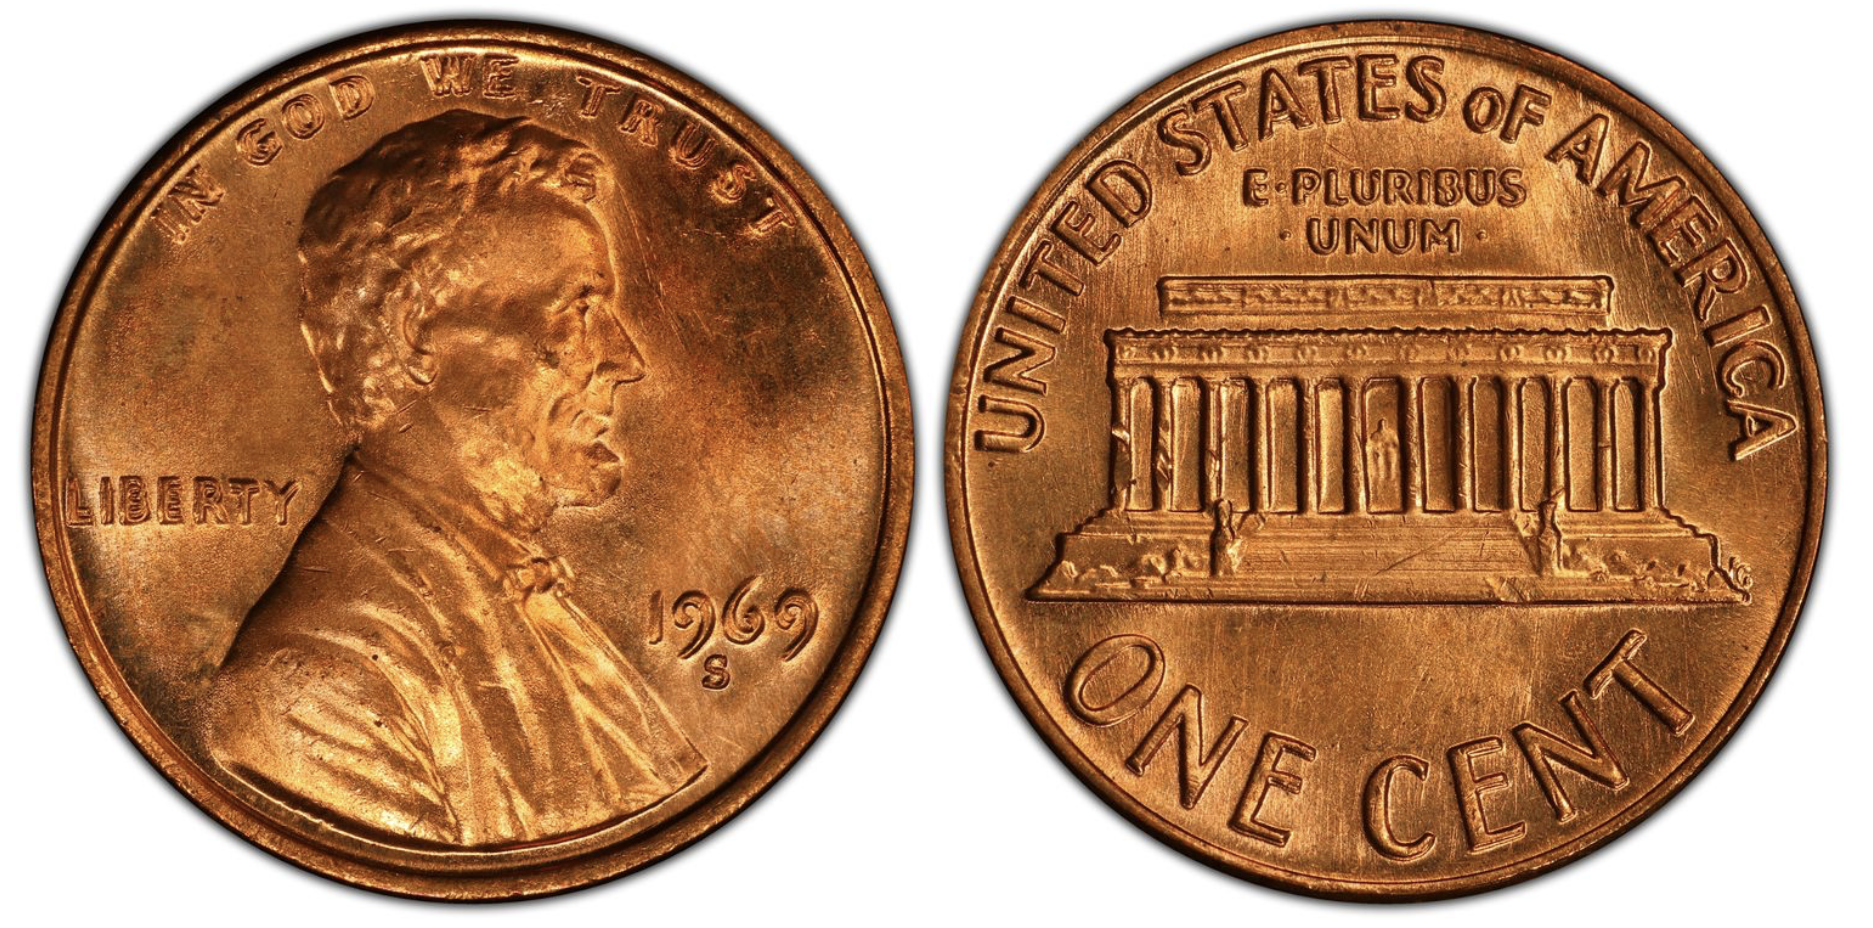 1969 S Lincoln penny mint mark